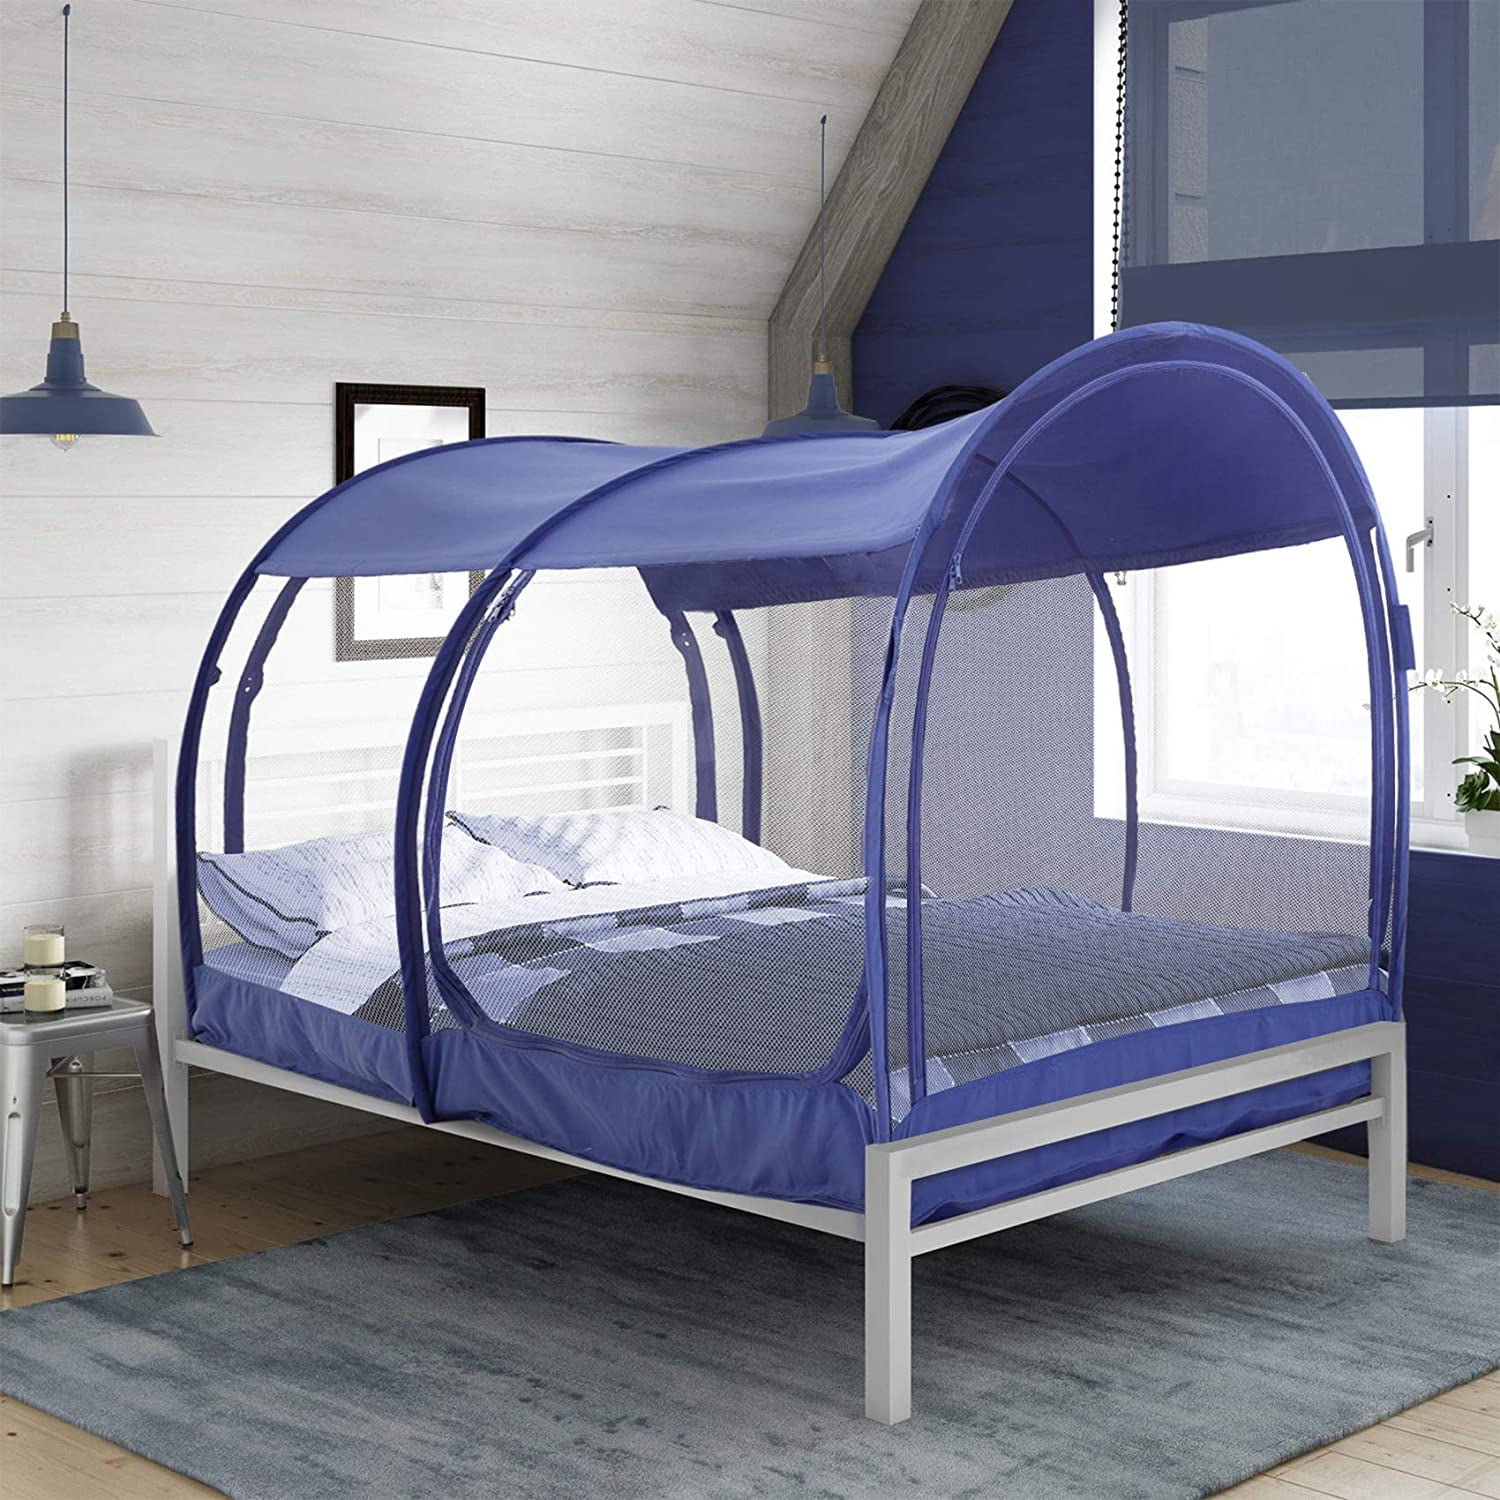 Alvantor Mosquito Net Bed Canopy, Tents For Bunk Beds Tent Only